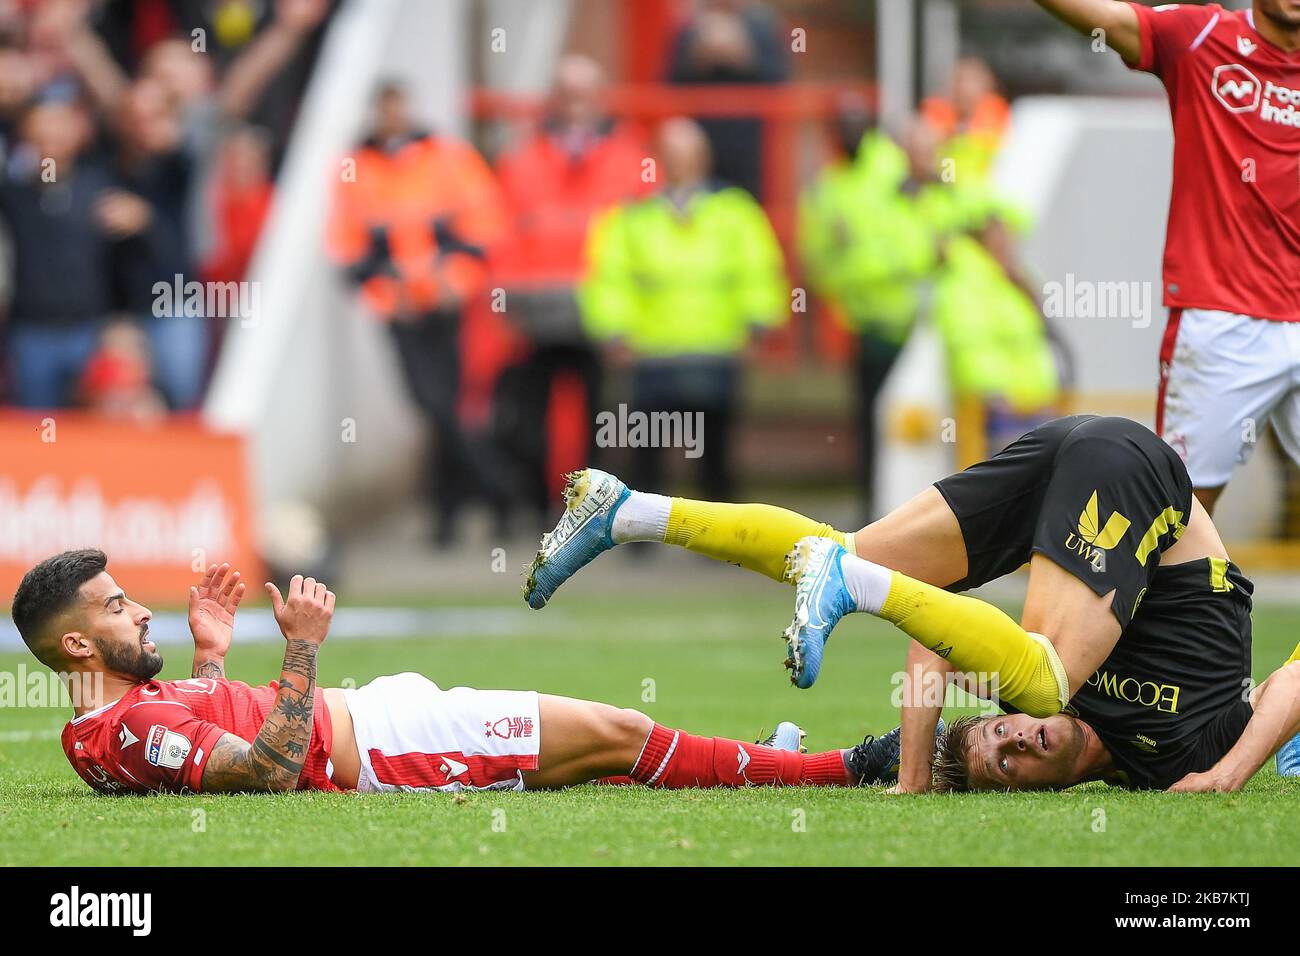 Tiago Silva (28) of Nottingham Forest and Mathias Jensen (8) of Brentford during the Sky Bet Championship match between Nottingham Forest and Brentford at the City Ground, Nottingham on Saturday 5th October 2019. (Photo by Jon Hobley/MI News/NurPhoto) Stock Photo